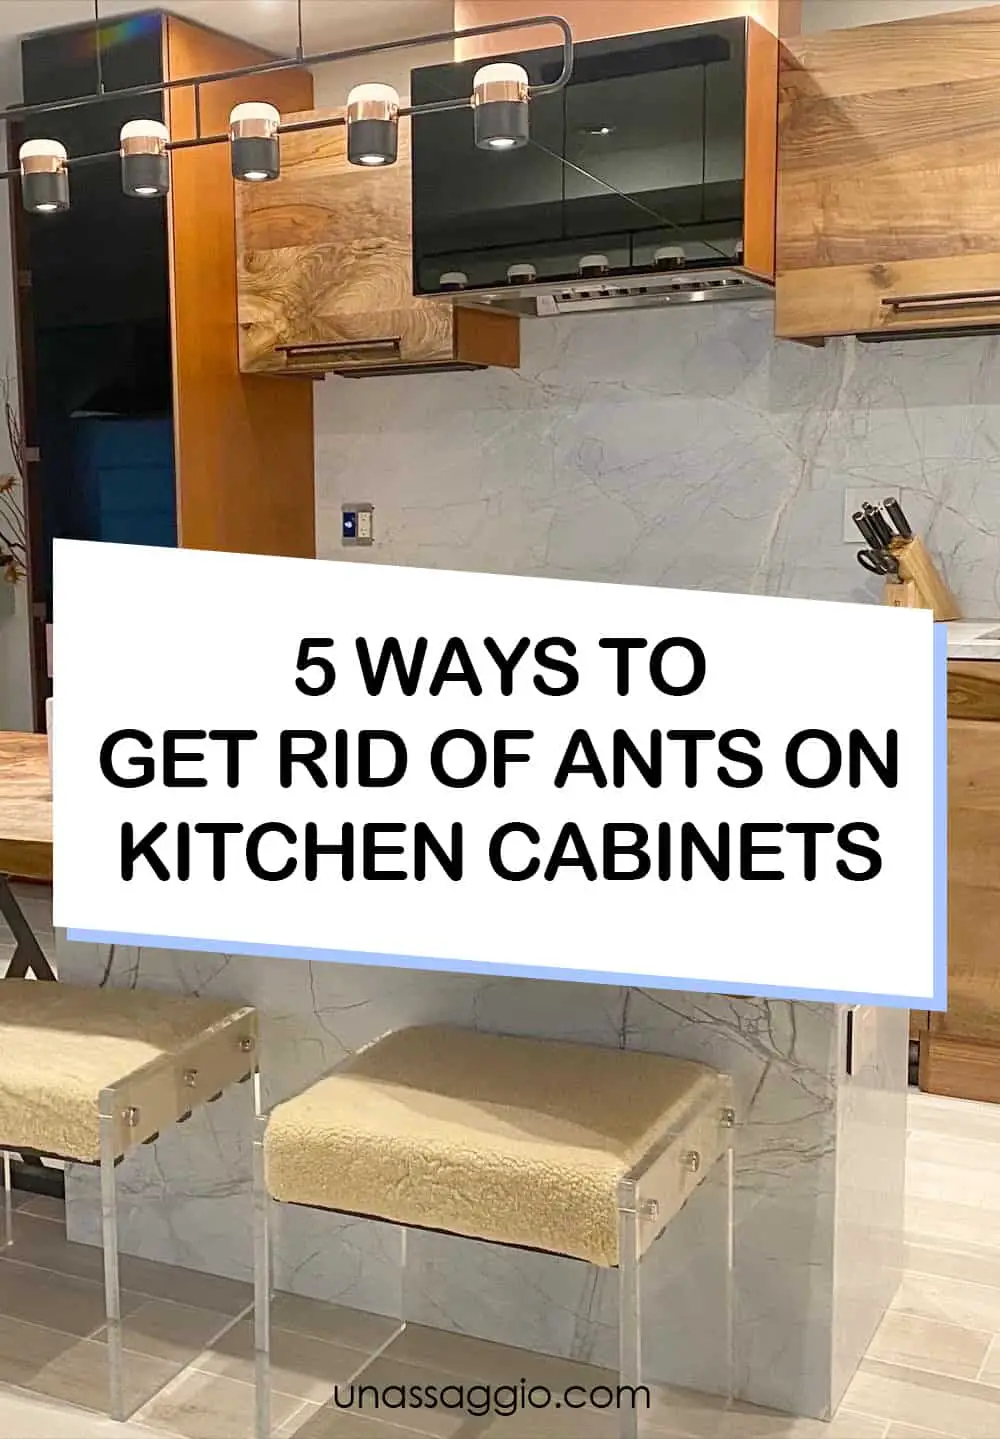 5 Ways to Get Rid Of Ants On Kitchen Cabinets